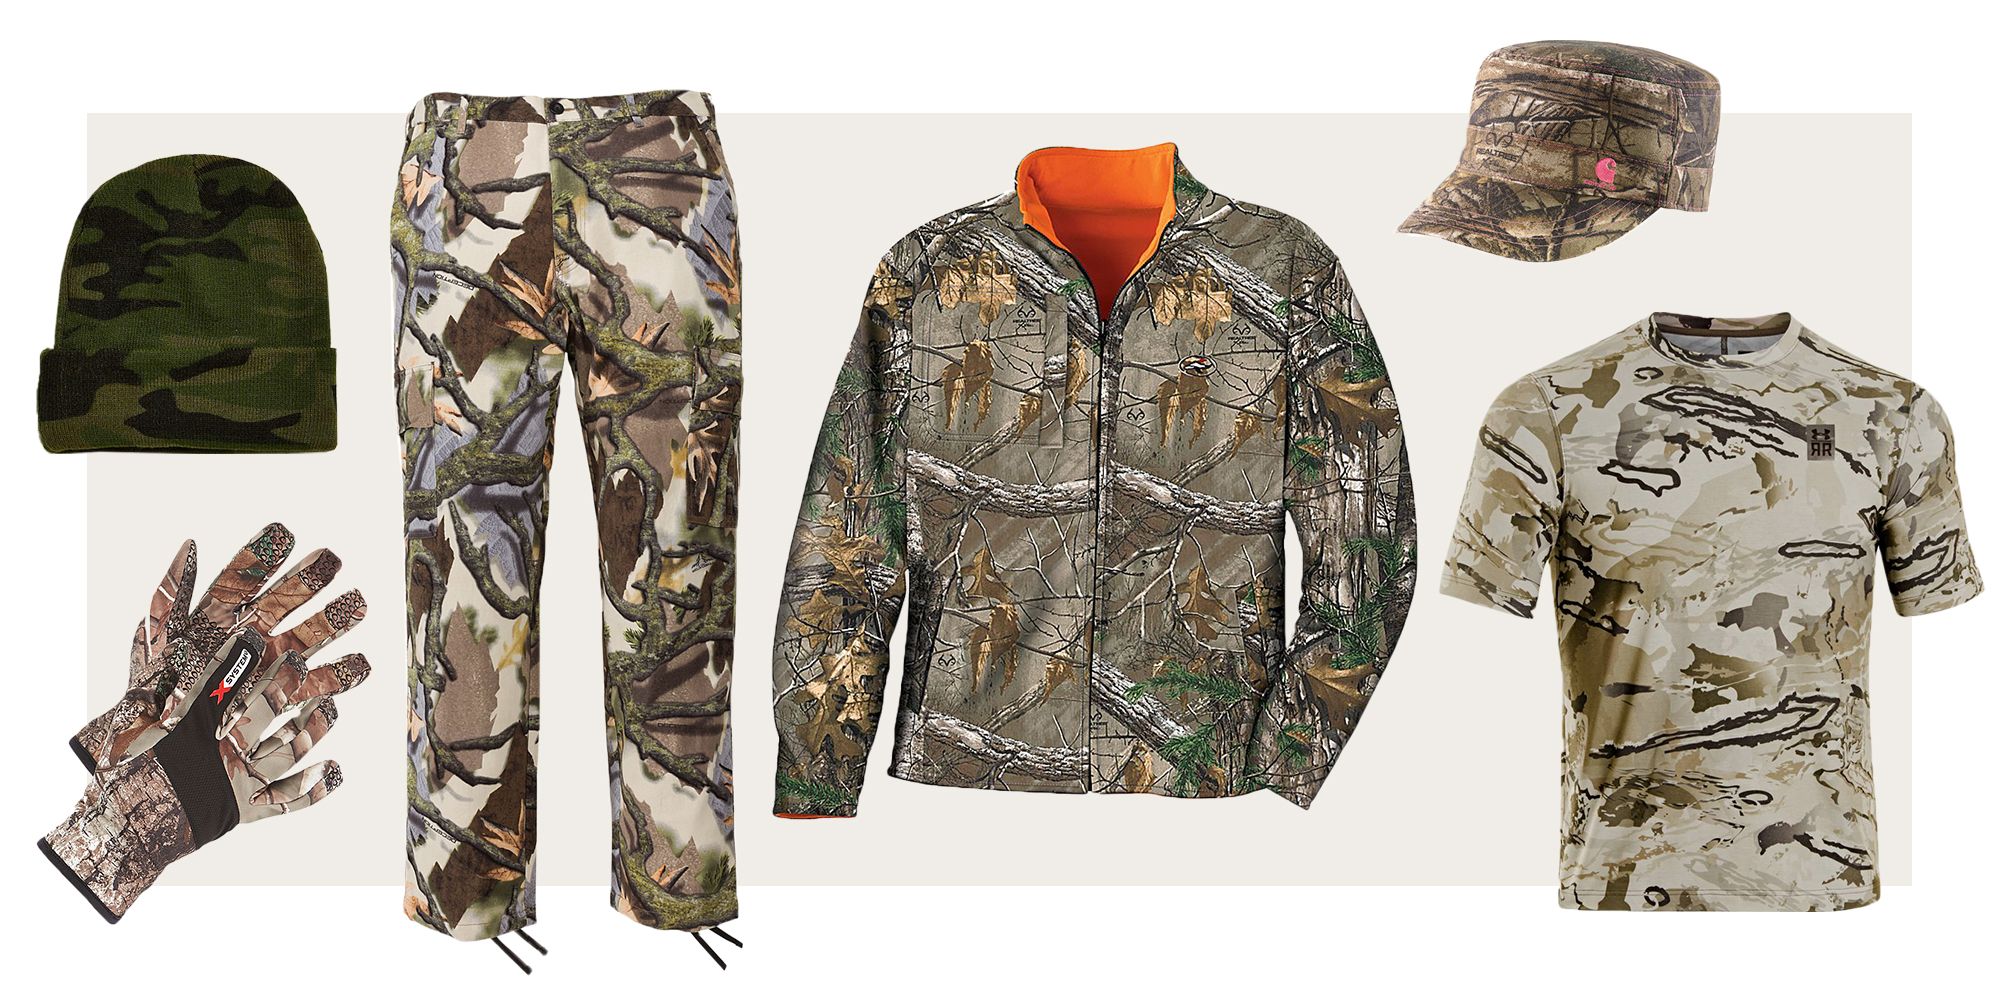 Best Camouflage Clothing for Hunting 2018 - Hunting Gear and Camo Clothing